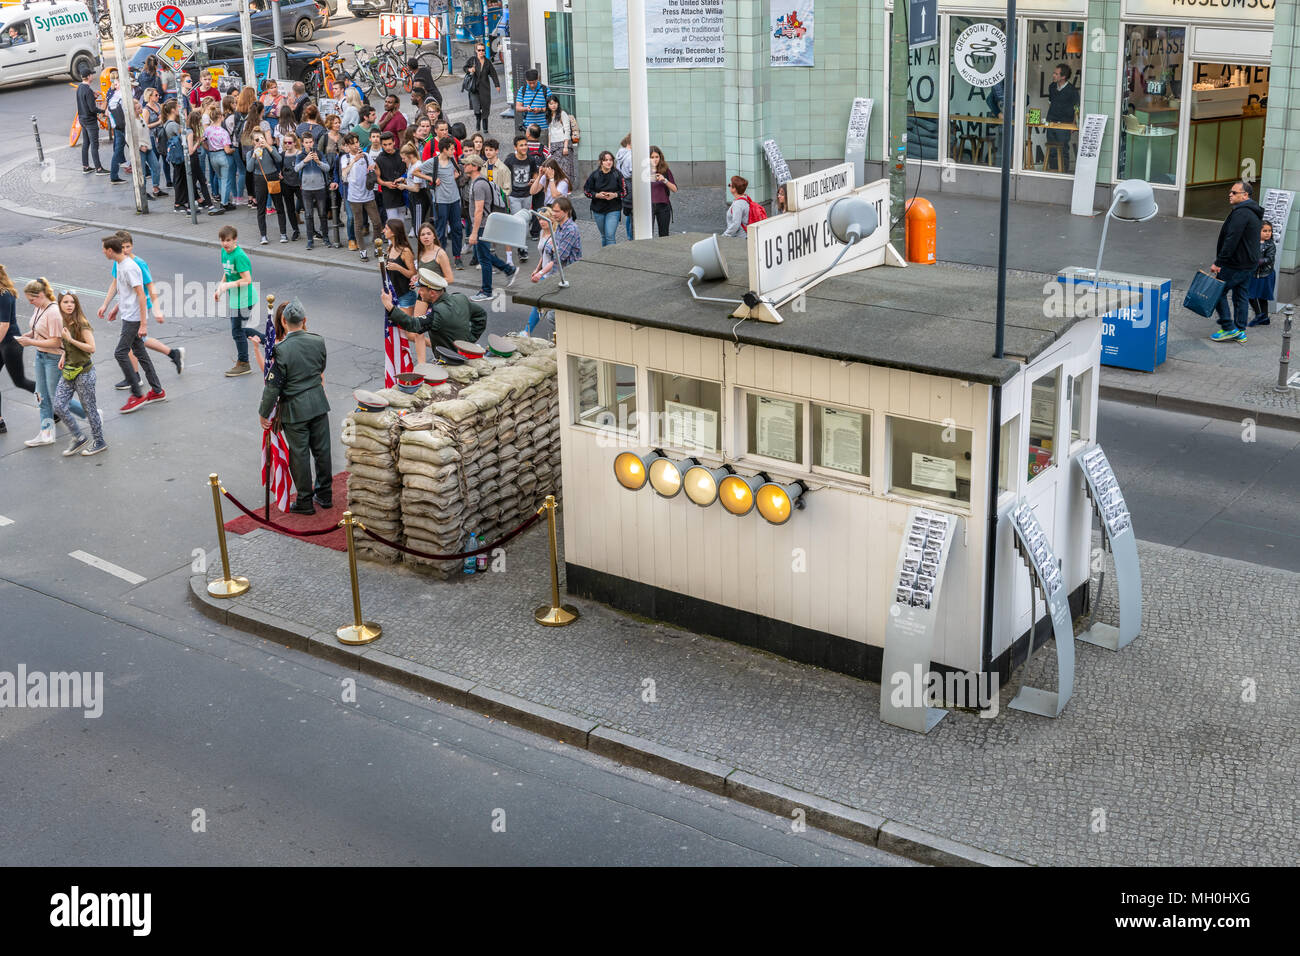 During the 'Cold War' Checkpoint Charlie used to be one of the most famous border crossings in the world. Nowadays it is a major tourist attraction in Stock Photo